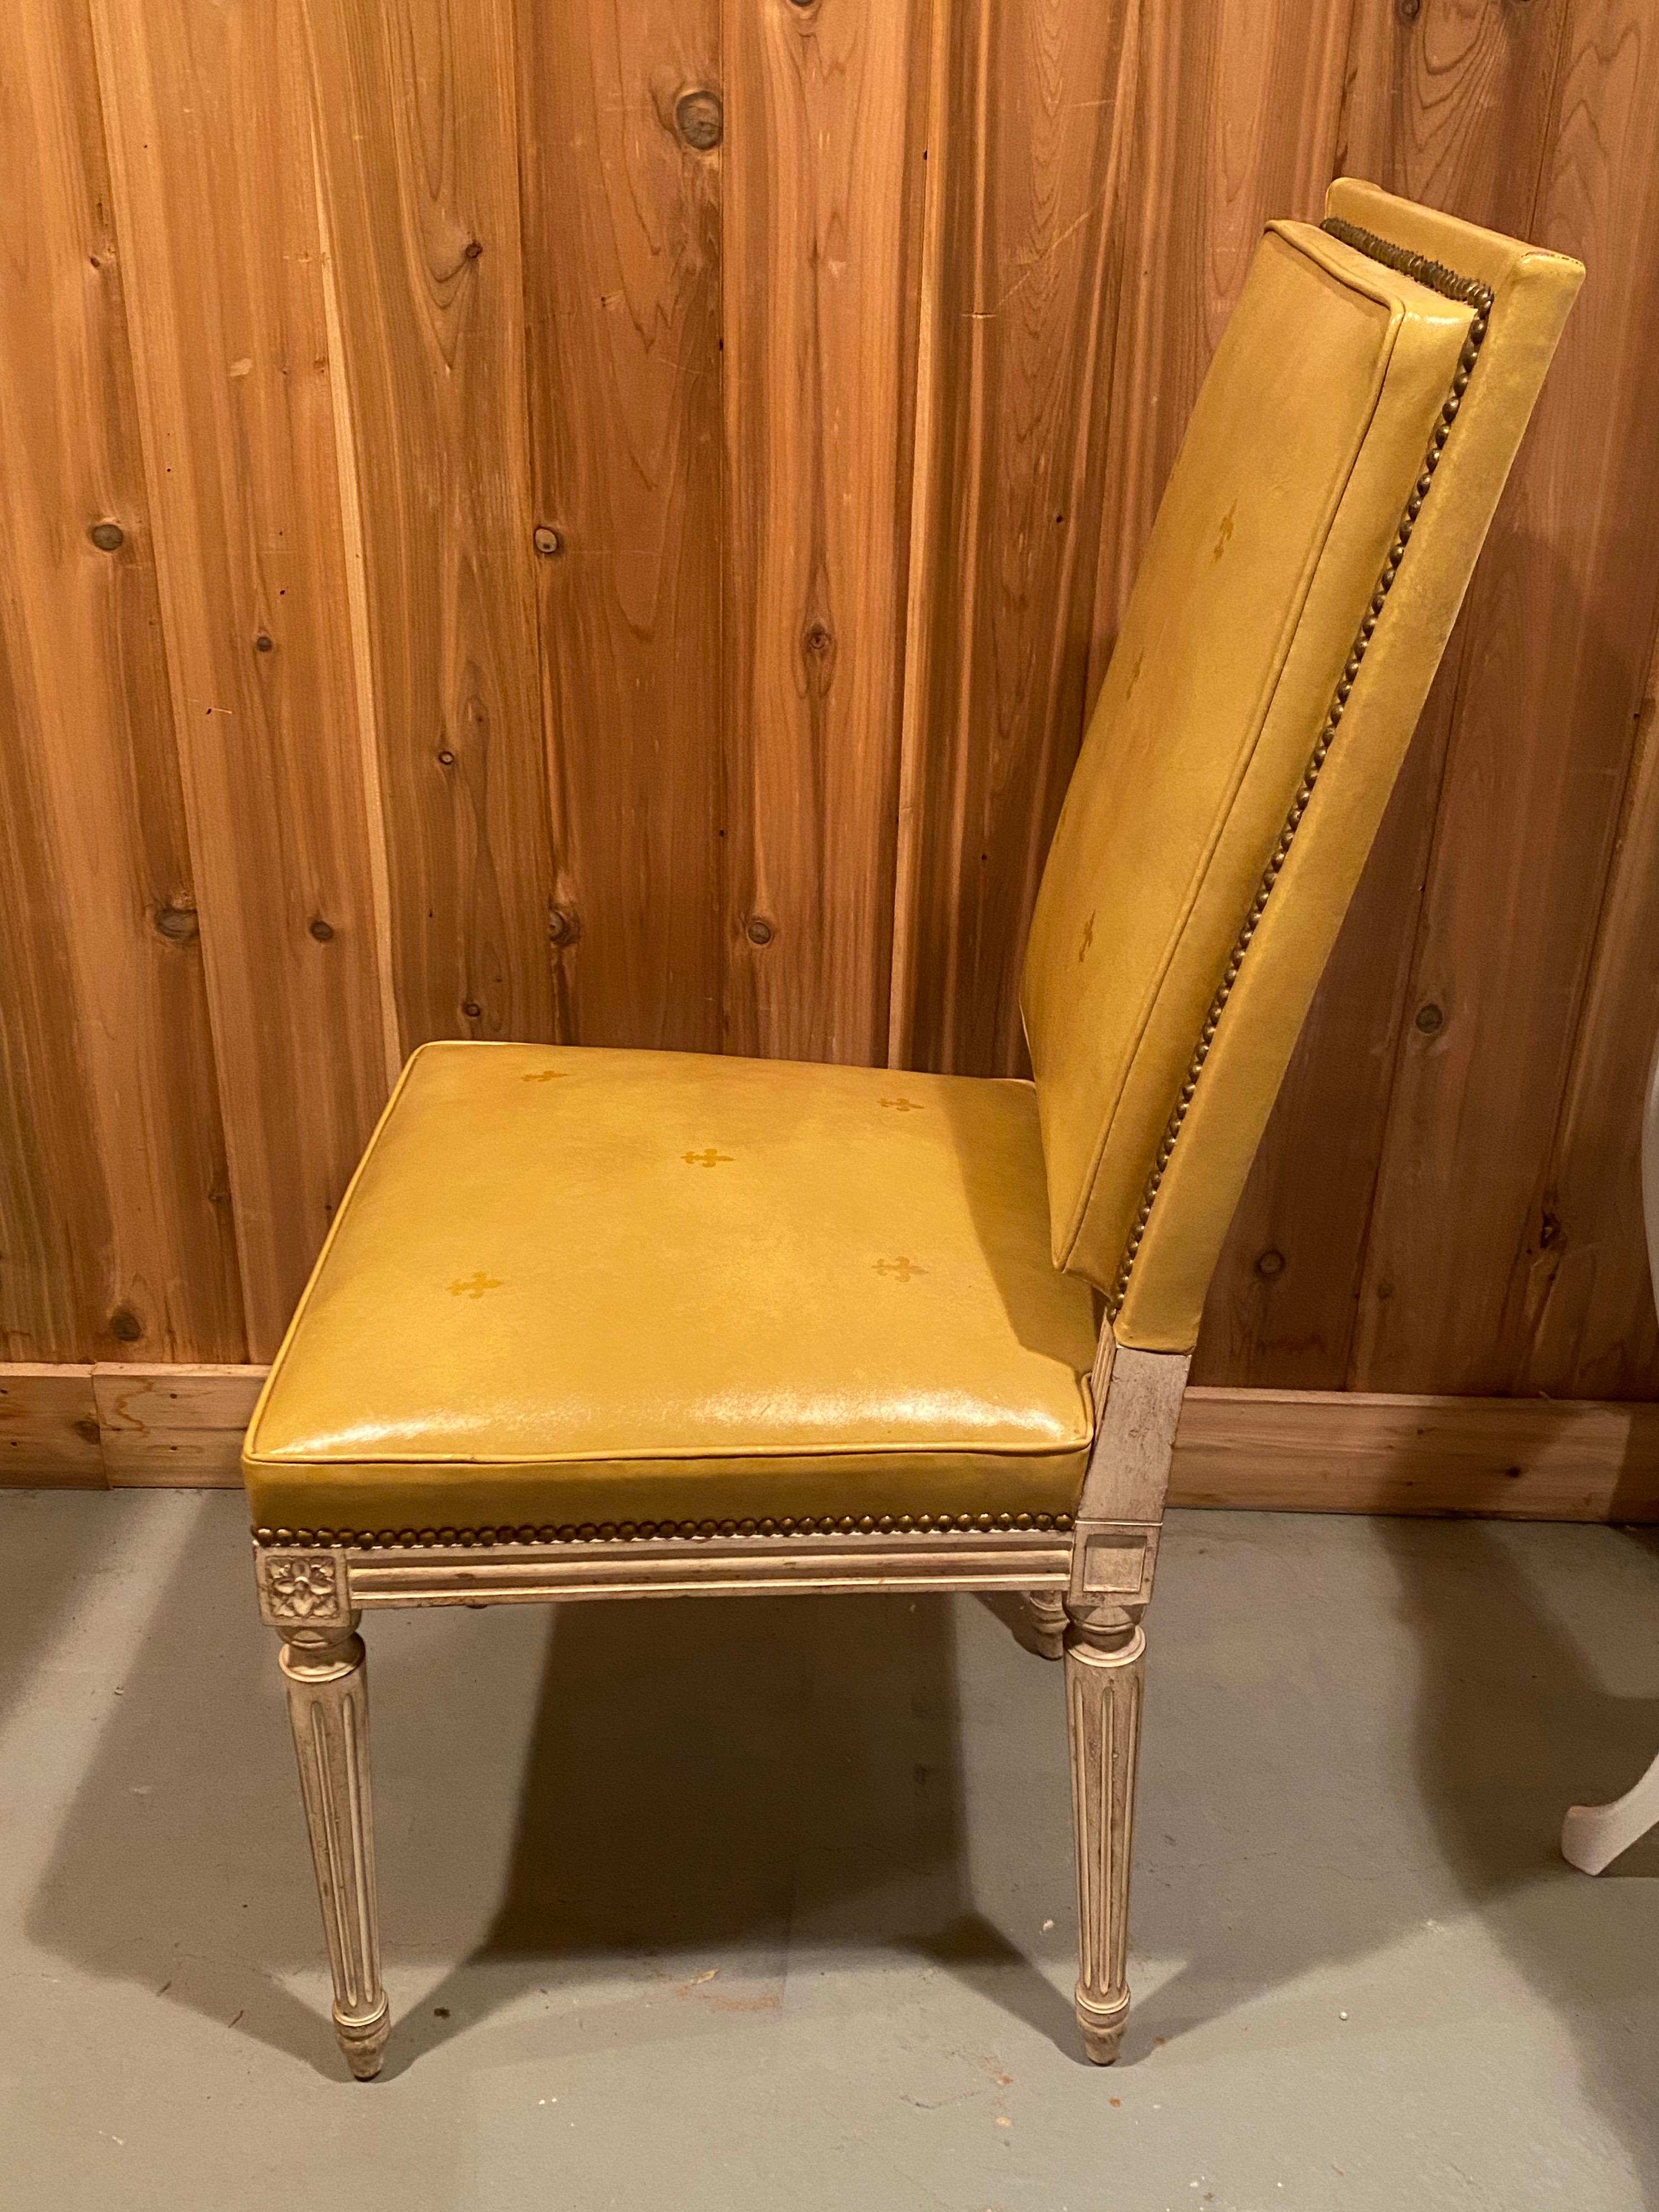 1920s set of six Louis XVI style leather upholstered dining chairs by Fine Arts Furniture Inc. NYC. Beautiful dining chairs upholstered in a yellow leather that wraps both the front and the back of the chairs as well as the seat. With gilt embossed